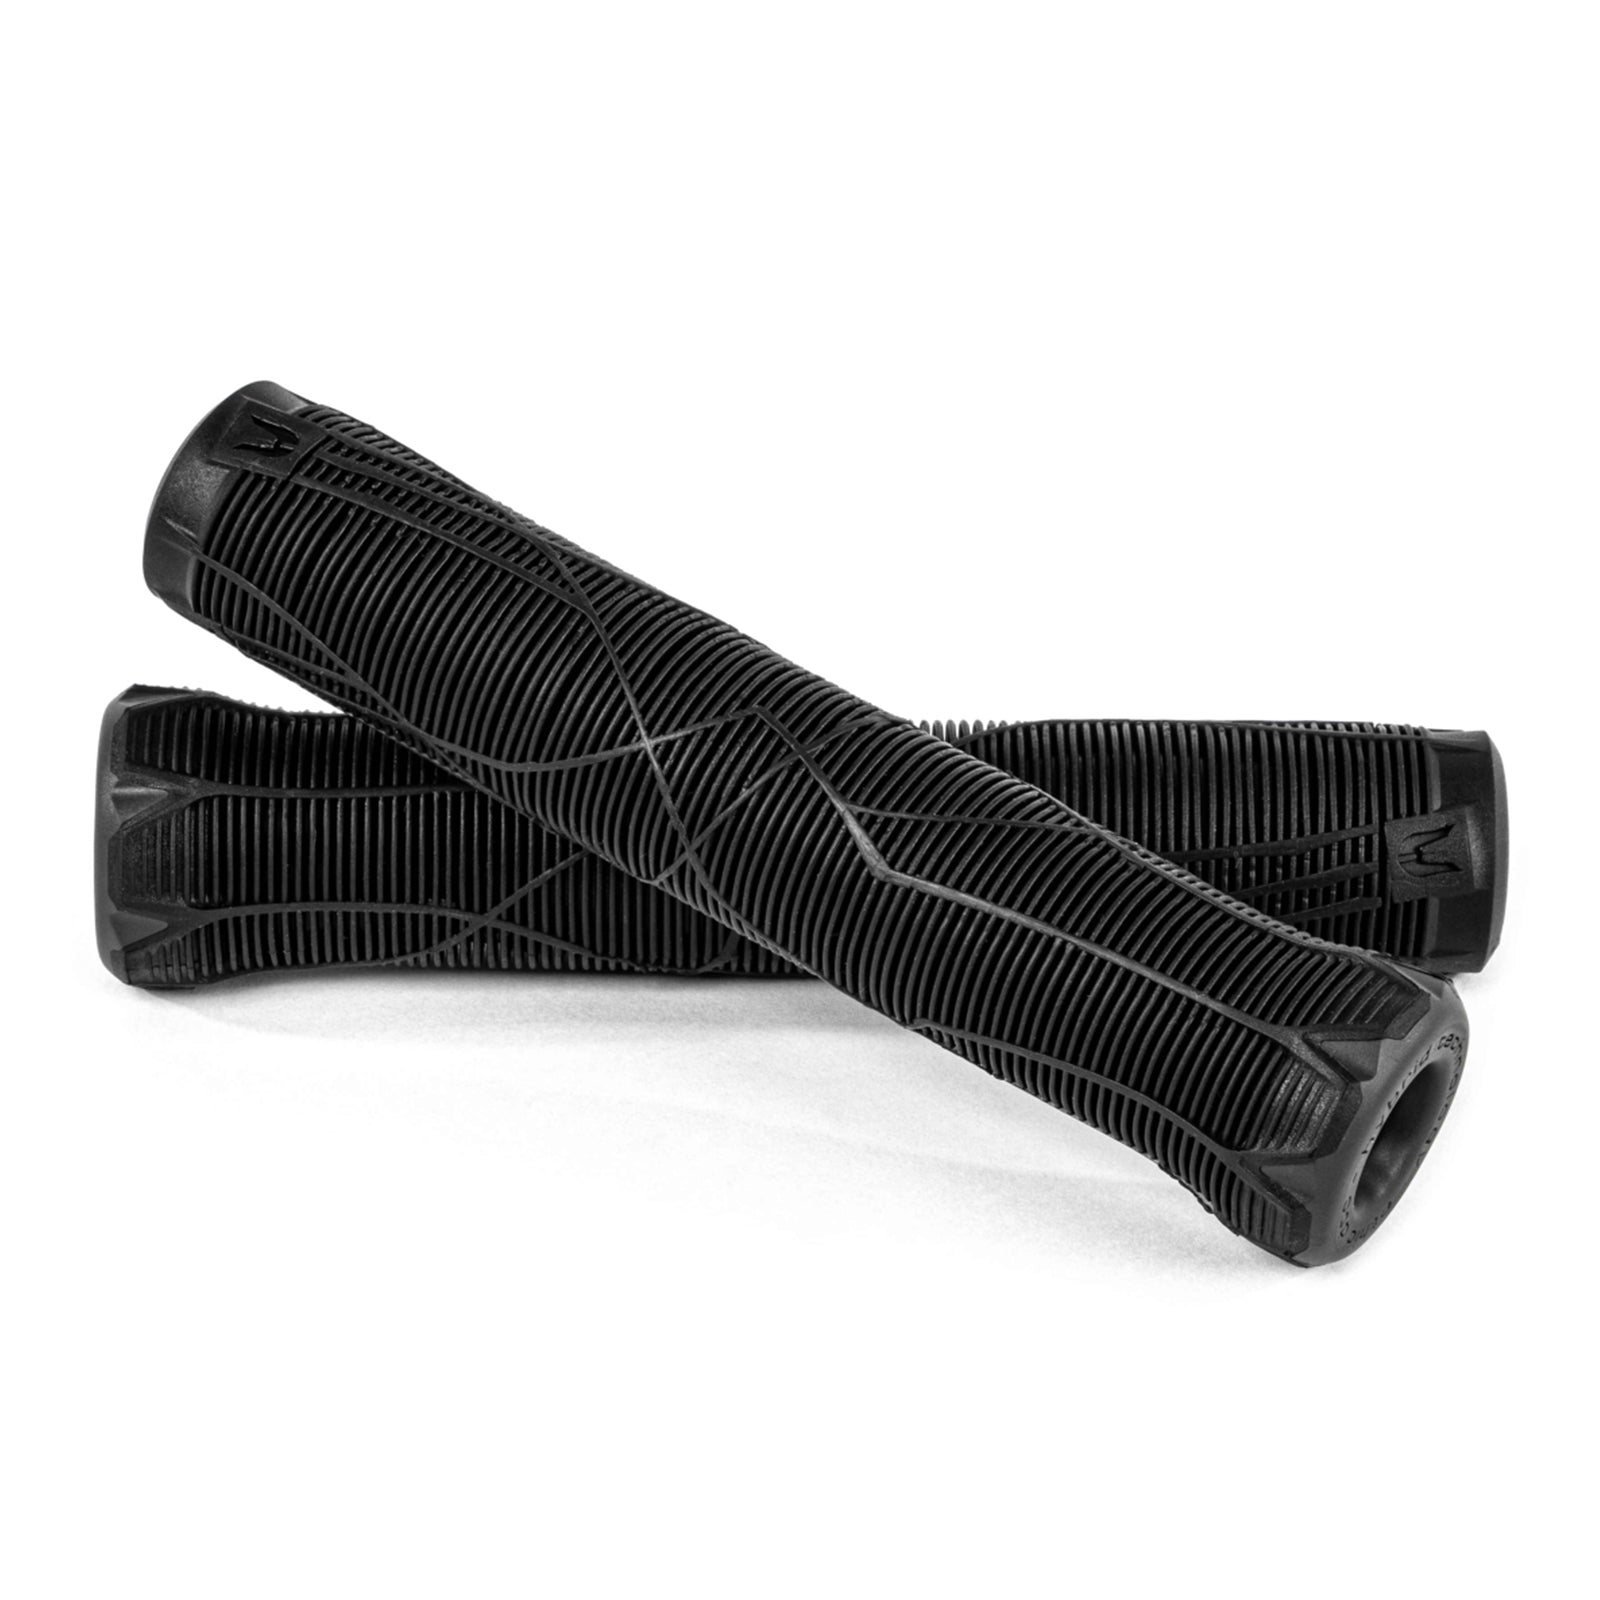 ETHIC DTC GRIPS RUBBER GRIPS (8 COLORS)